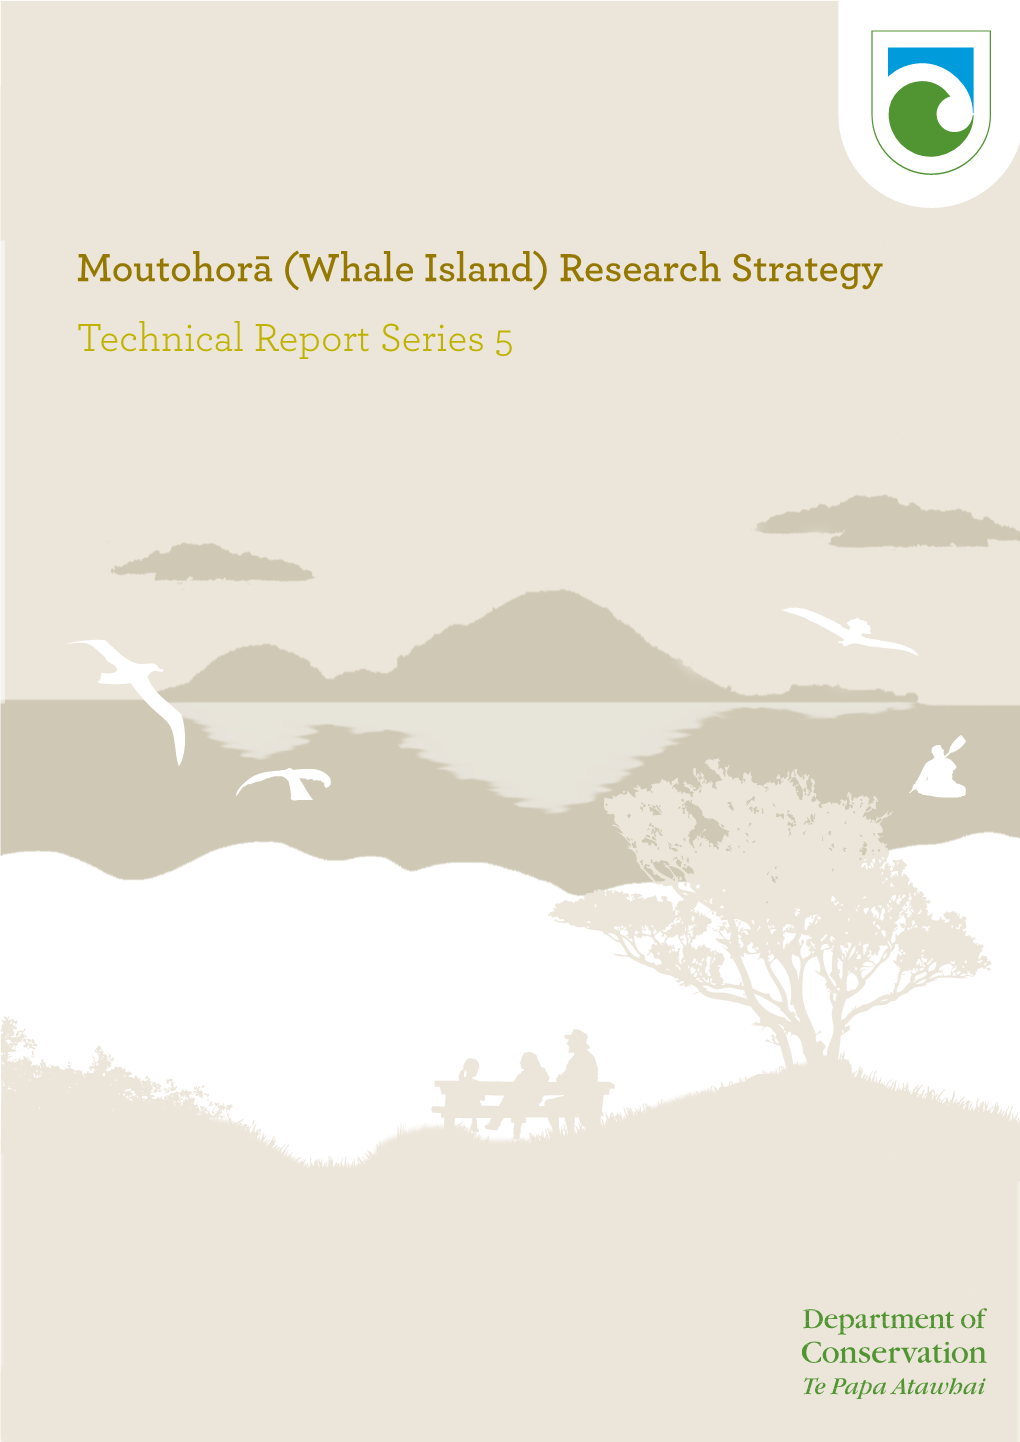 Whale Island) Research Strategy Technical Report Series 5